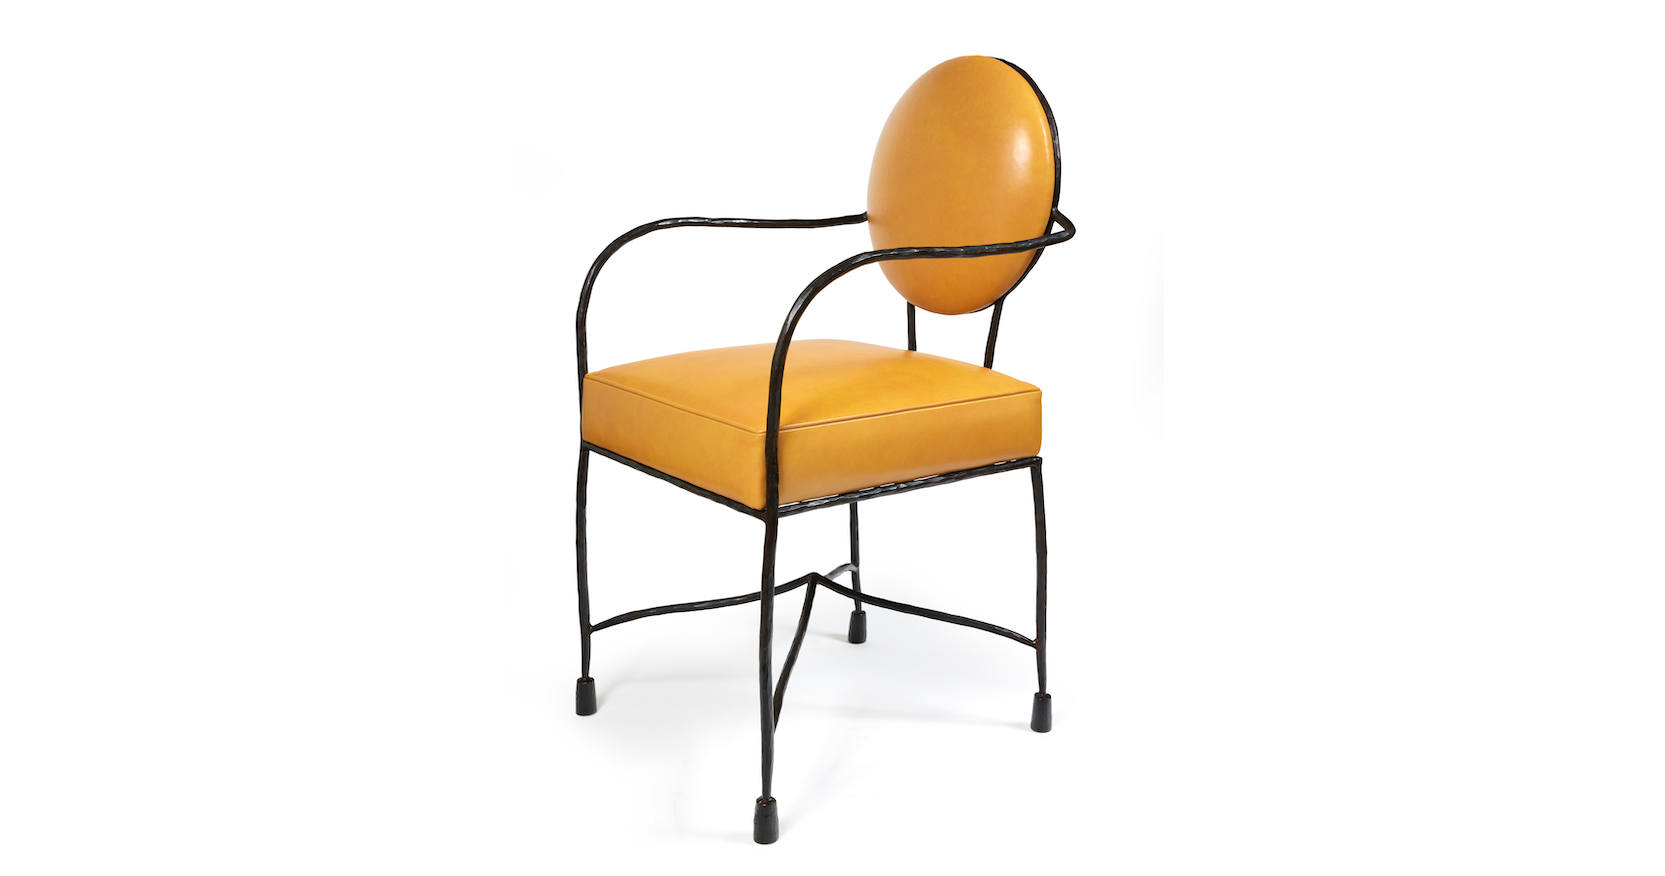 garouste bonetti, armchair with a brown wrought iron structure, seat and back in yellow leather